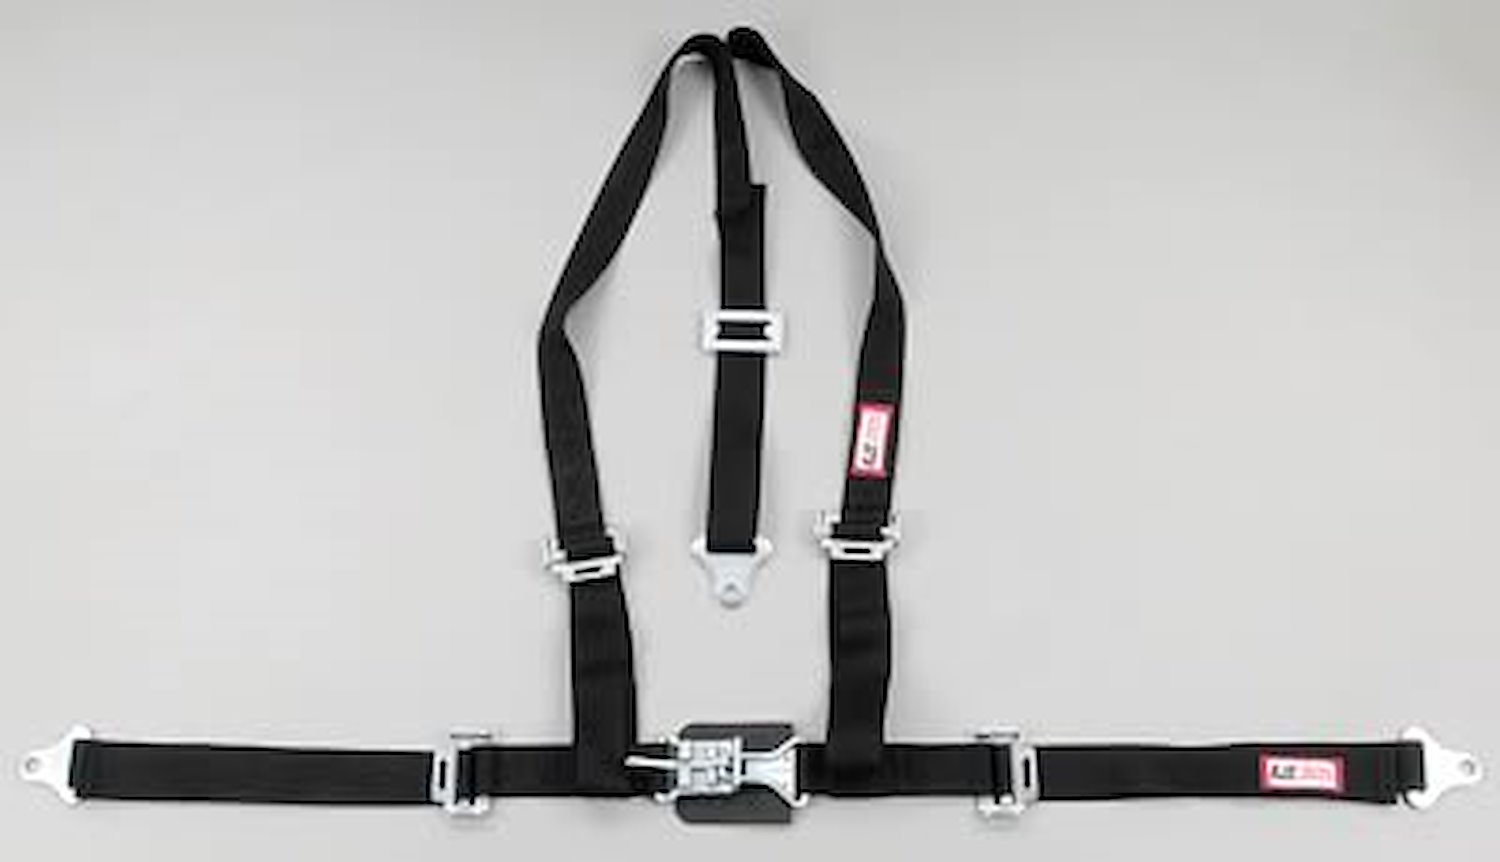 NON-SFI L&L HARNESS 2 PULL DOWN Lap Belt SEWN IN 2 S.H. Y FLOOR Mount w/STERNUM STRAP ALL WRAP ENDS GRAY